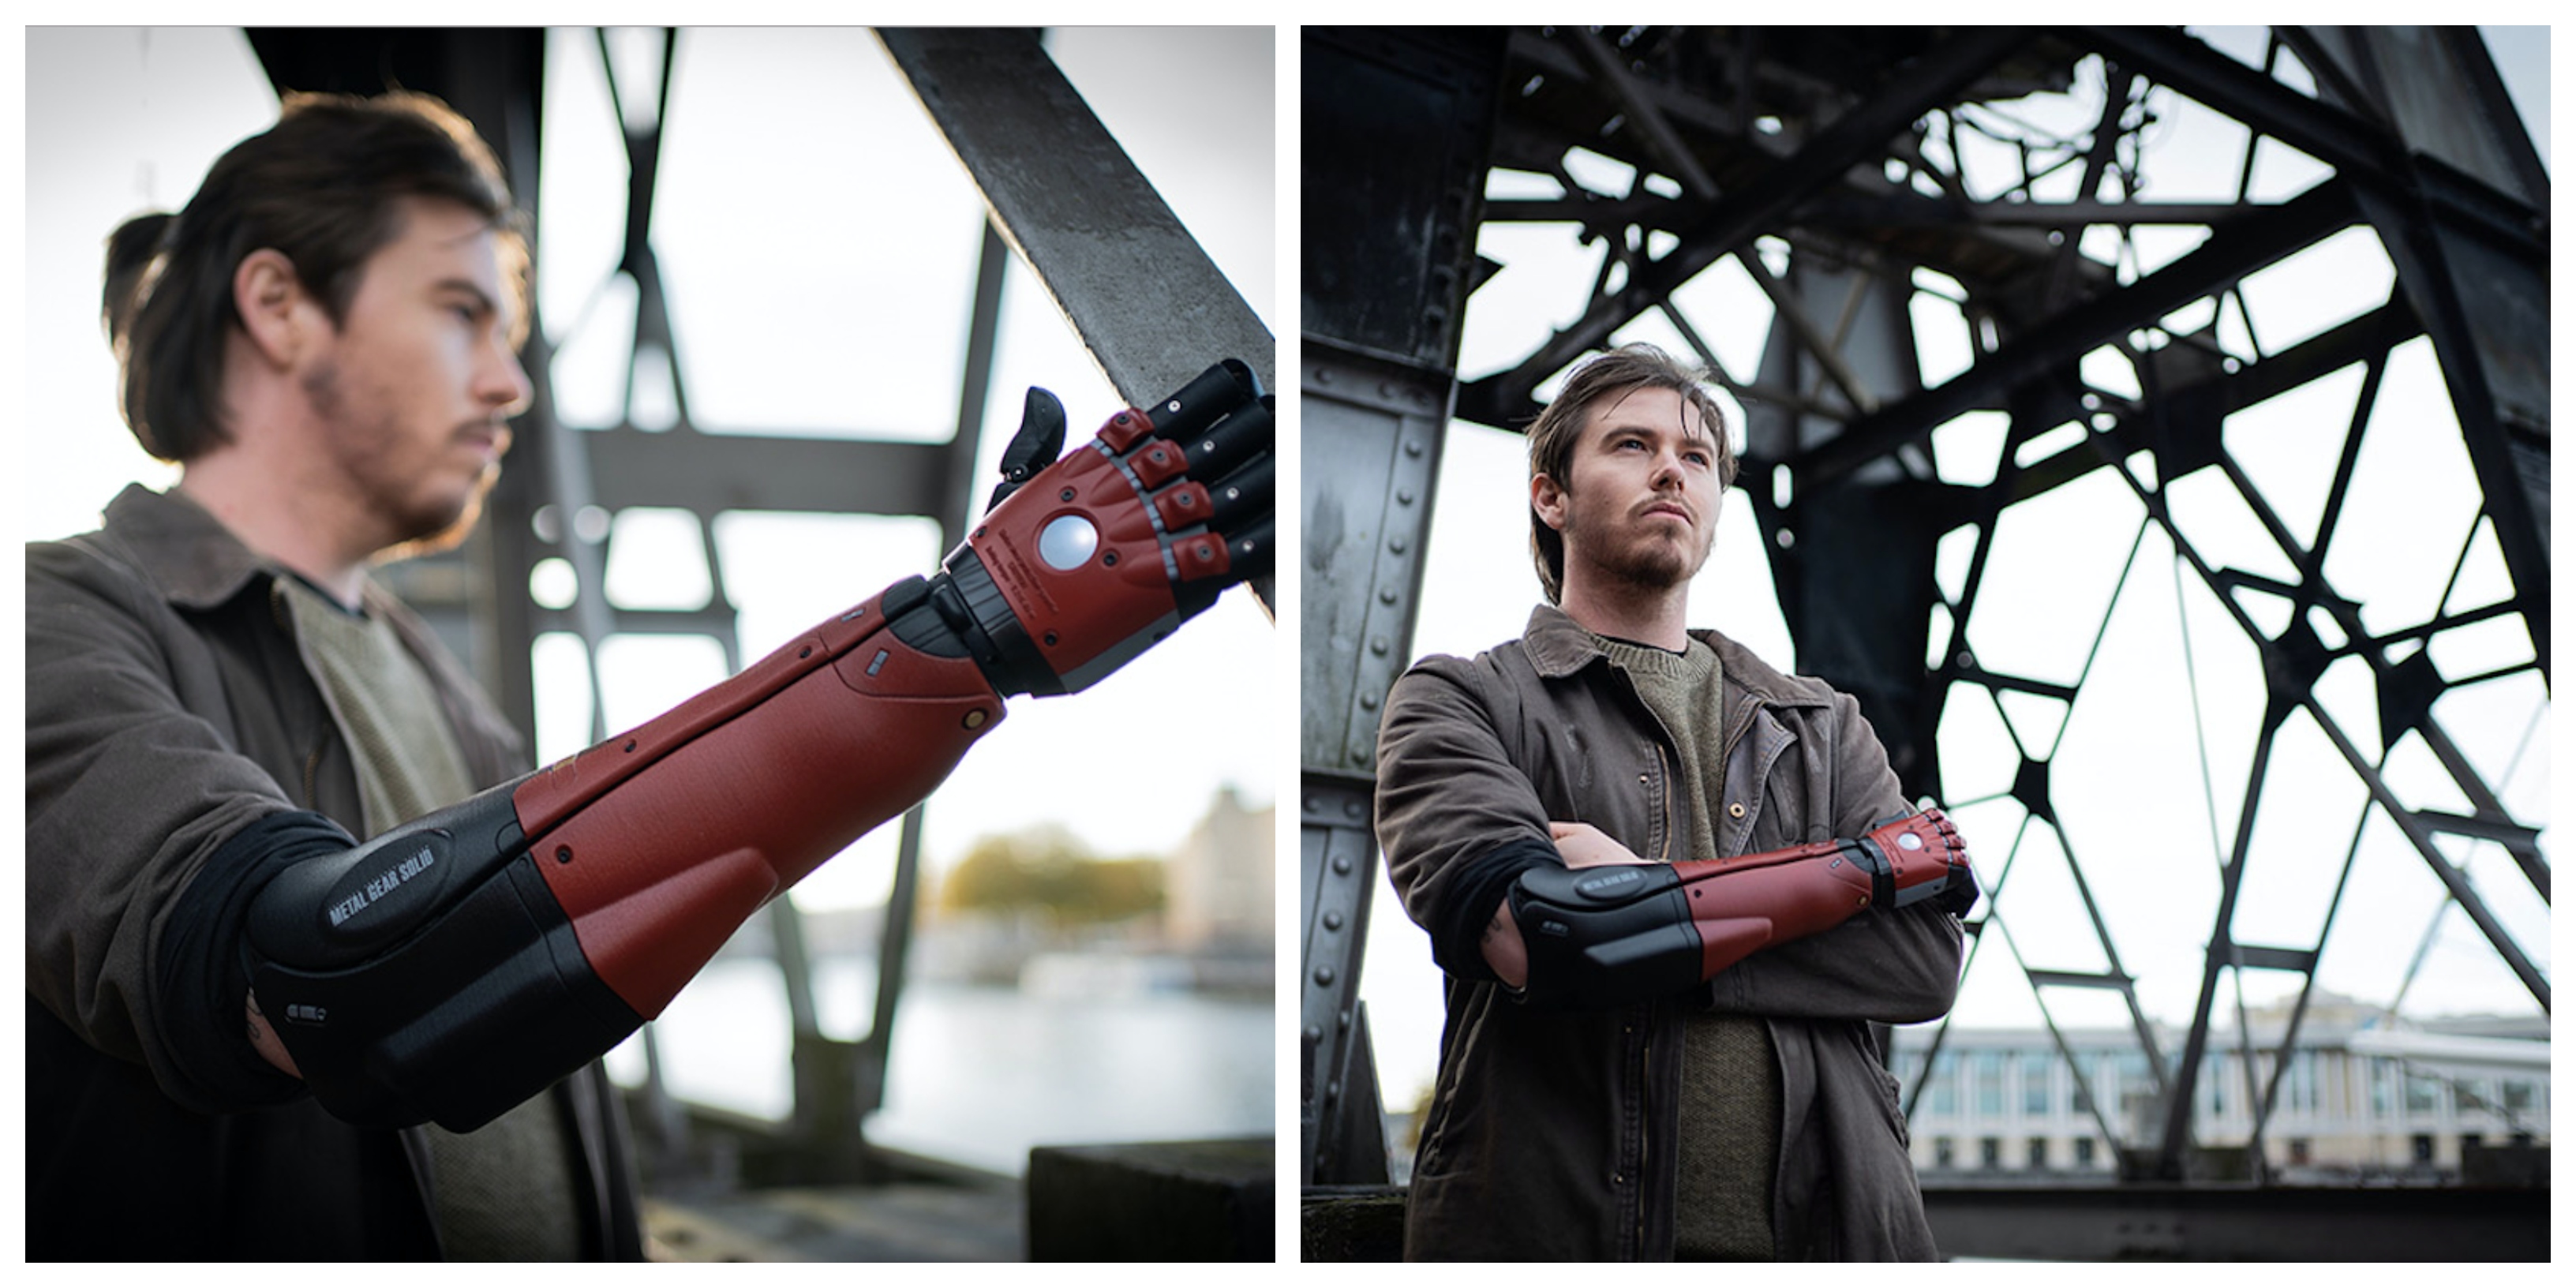 Konami partners with Open Bionics to launch official 3D printed Metal Gear Solid bionic arm